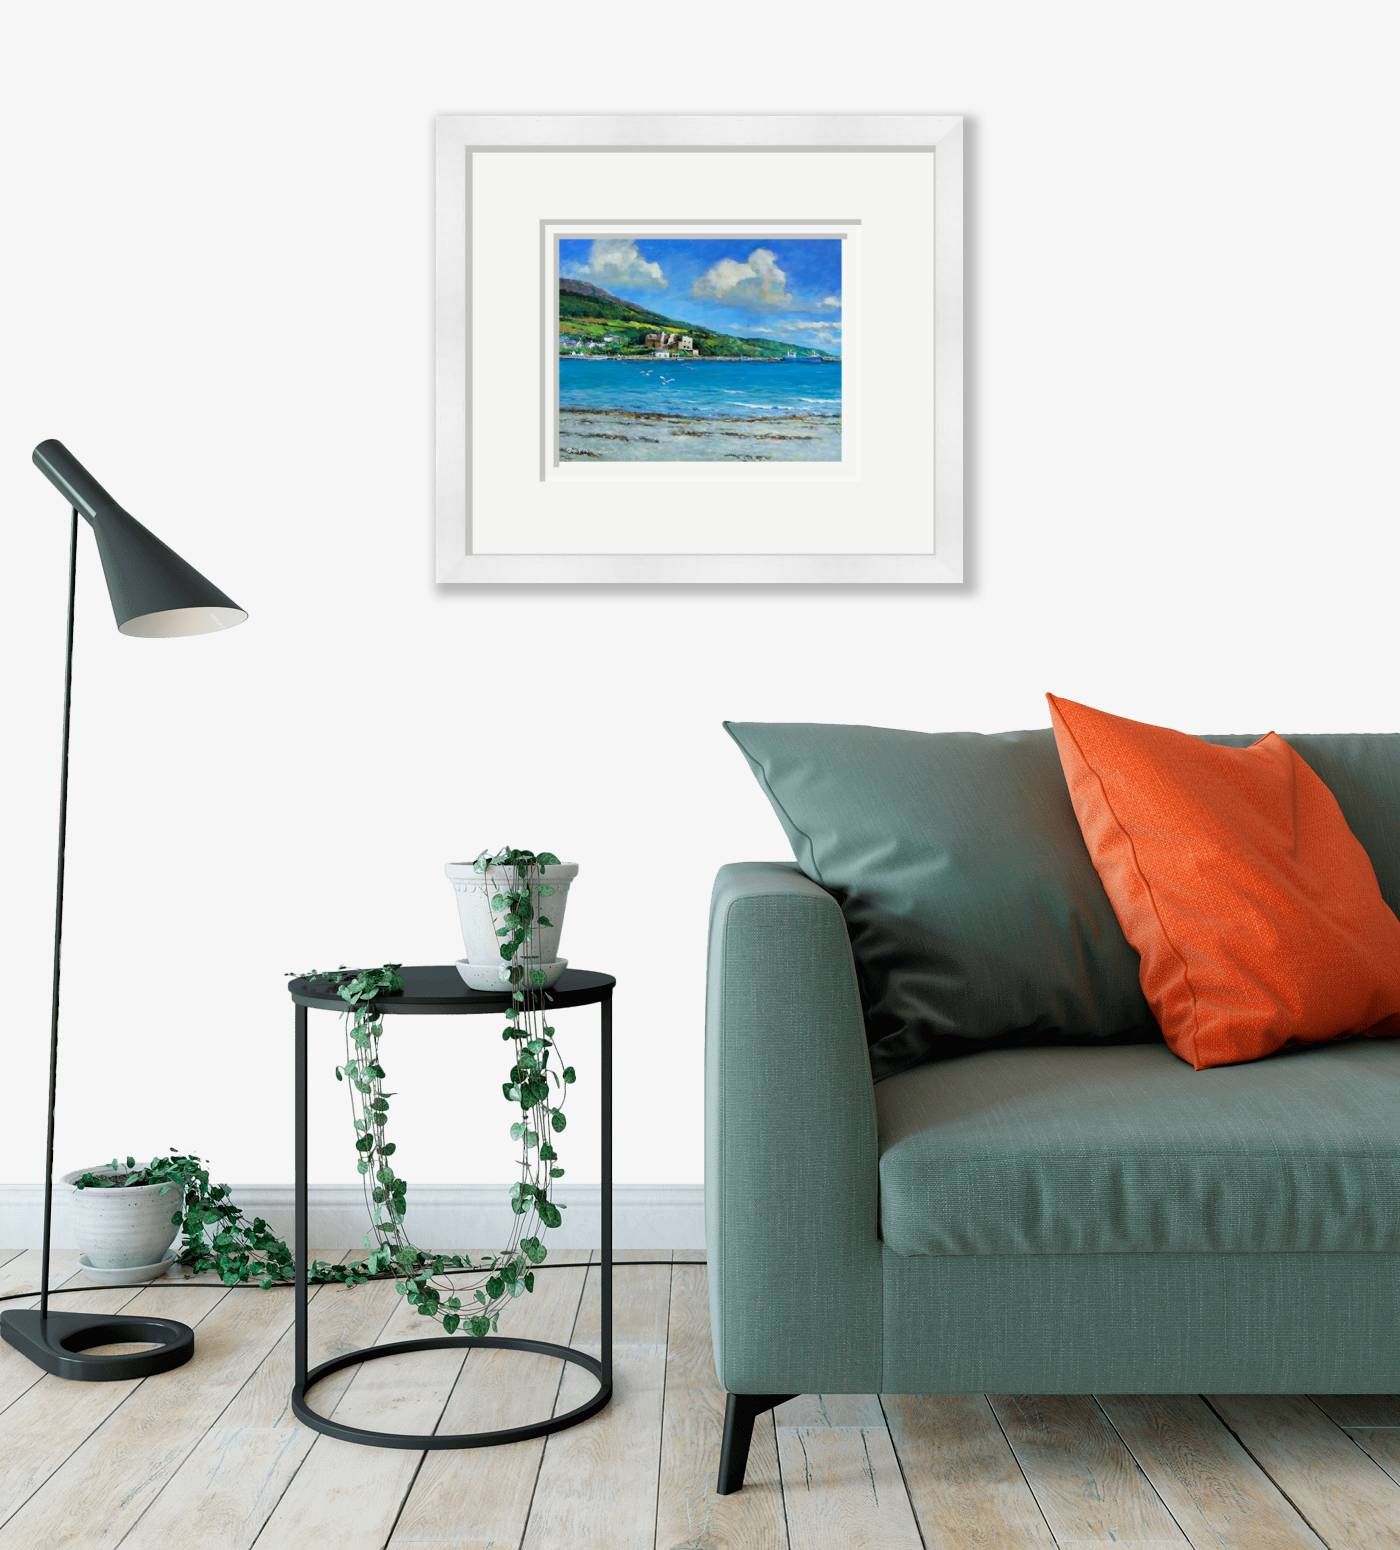 Large framed - Carlingford, Co Louth - 483 by Chris McMorrow